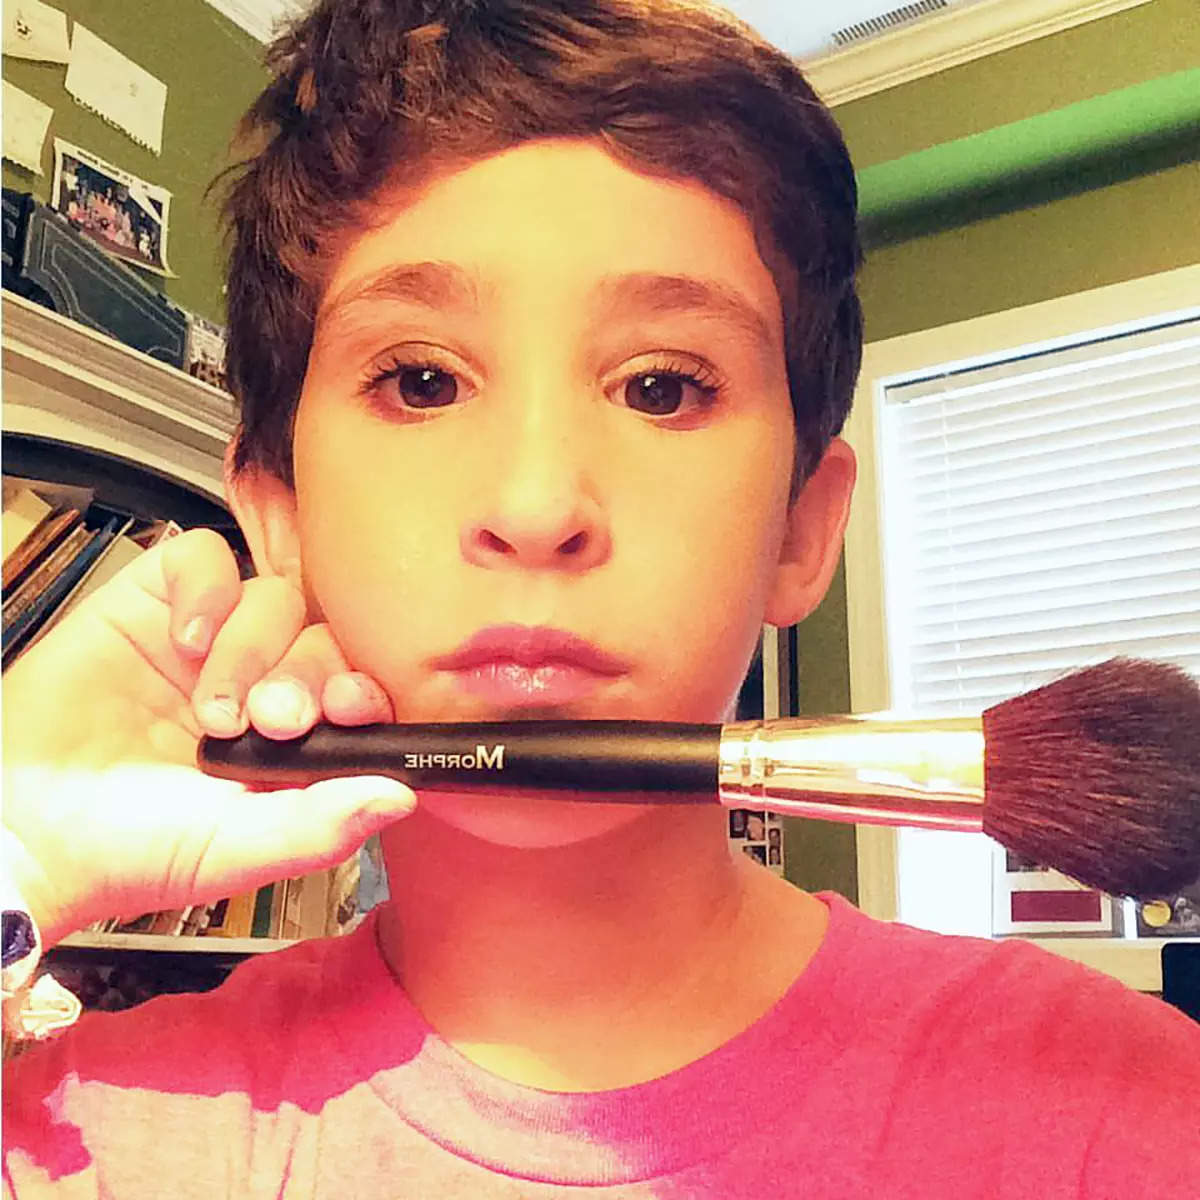 13-year-old beauty influencer Harrison Schwartz is on his road to becoming an internet sensation